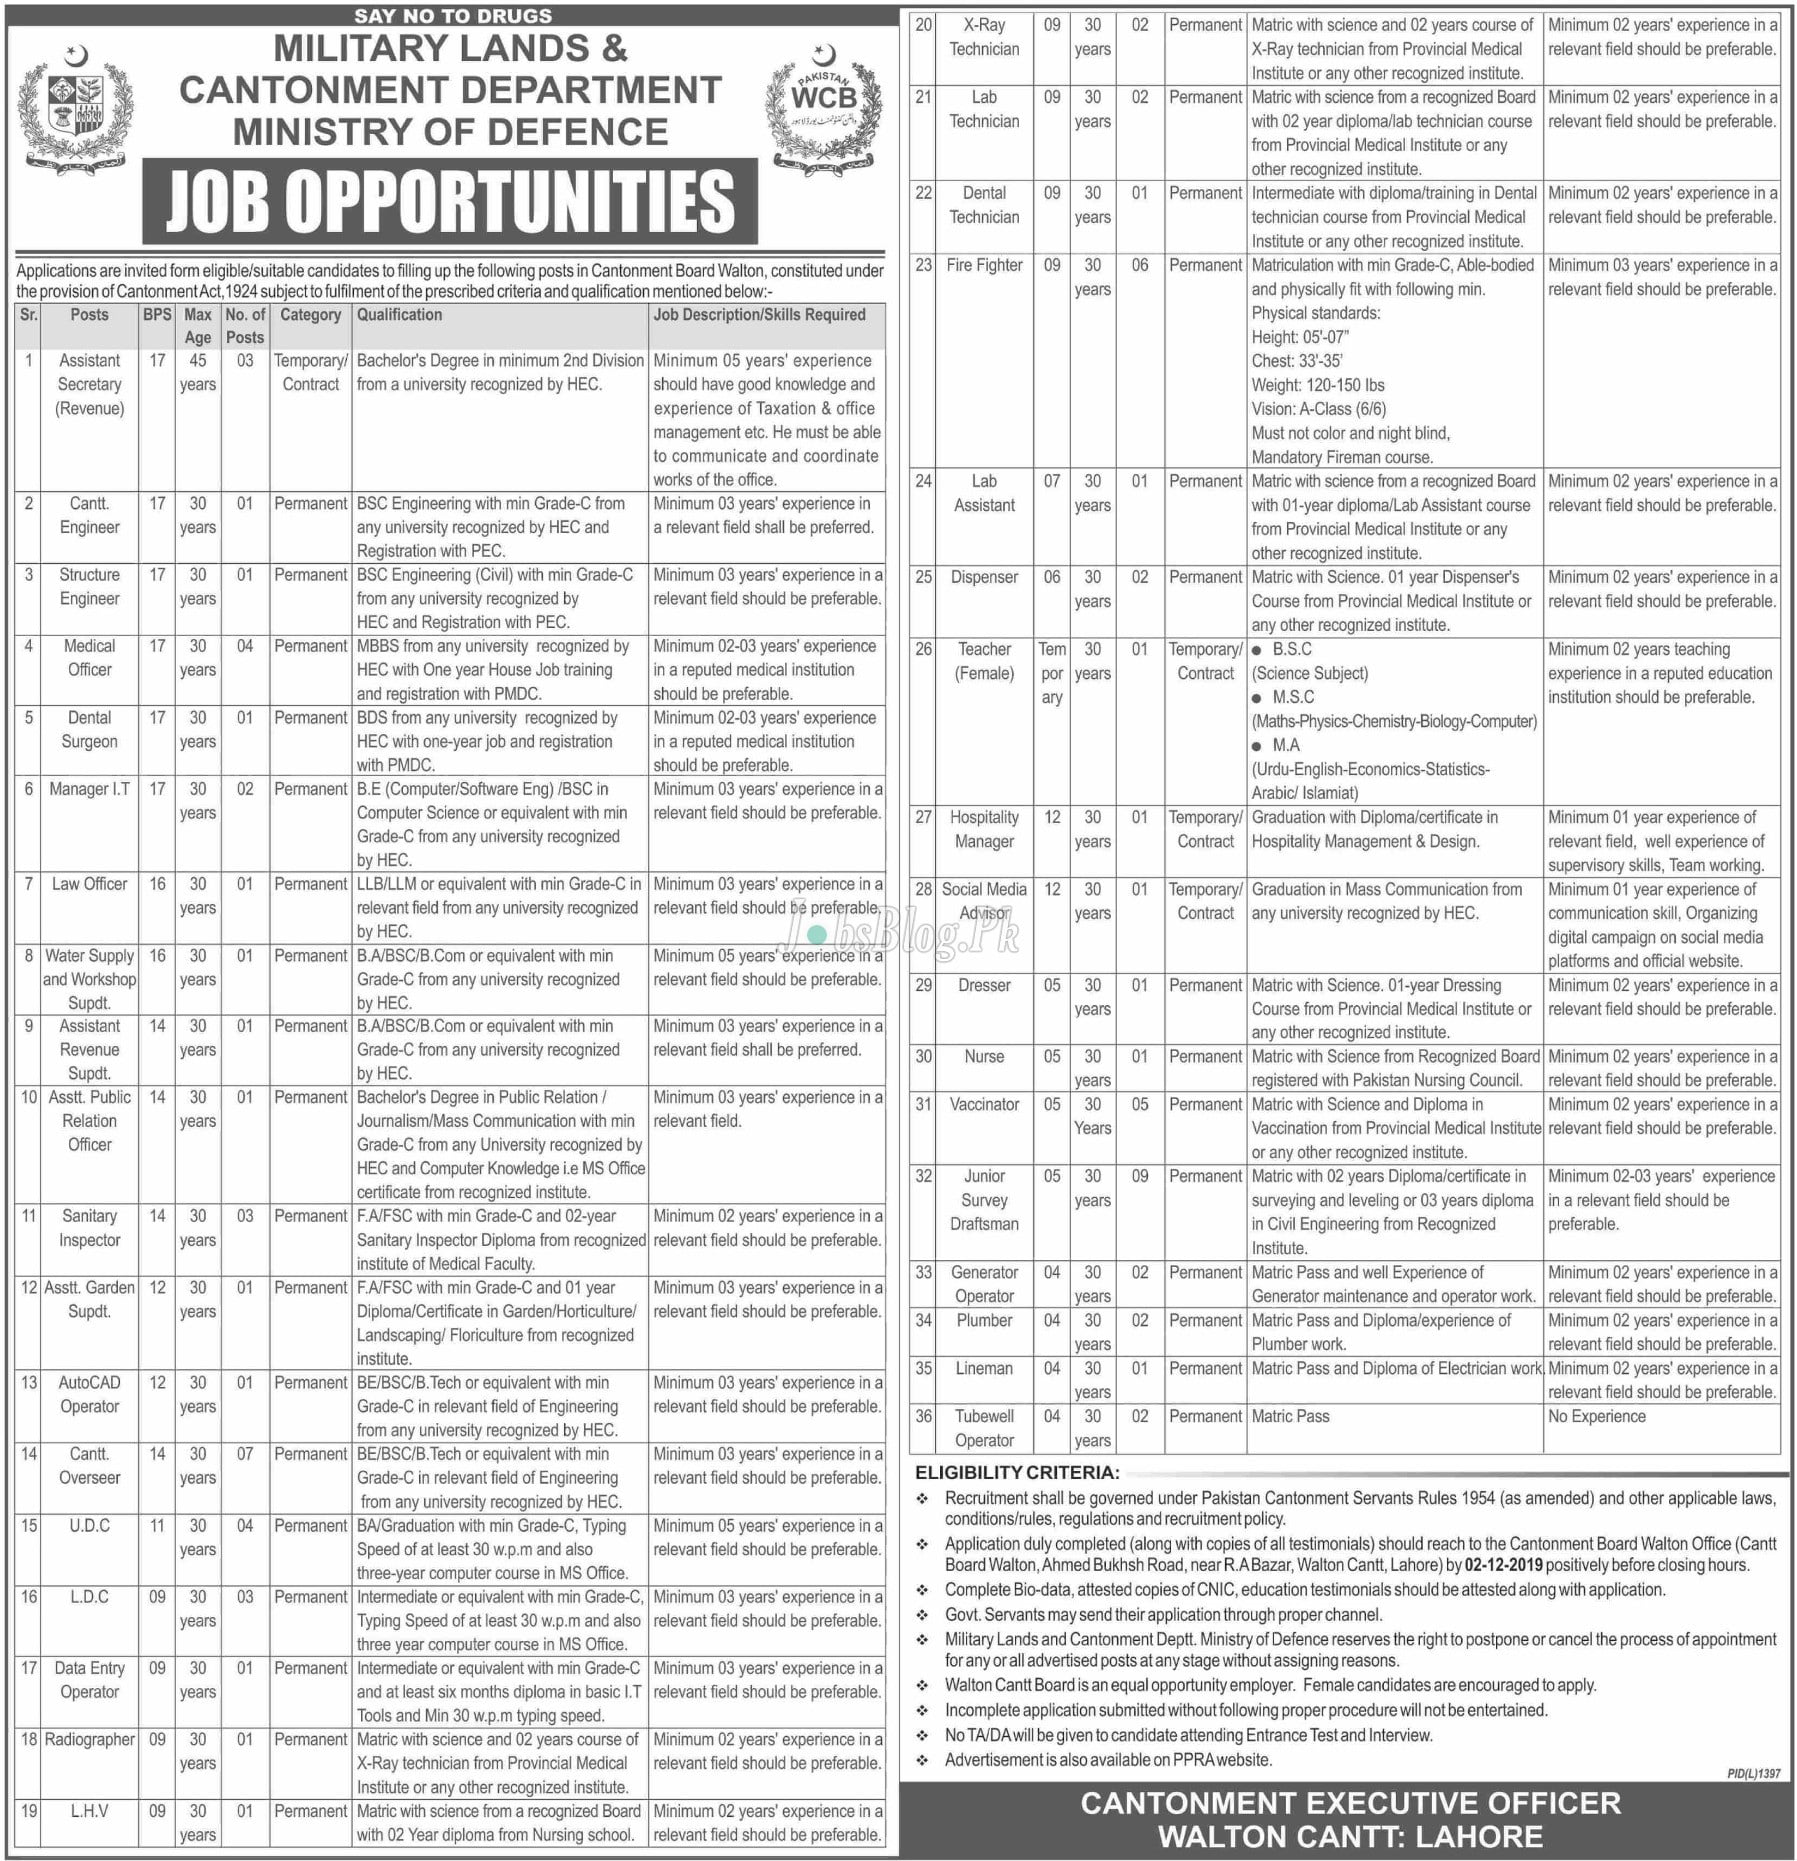 Military Lands and Cantonment Department MOD Jobs 14th November 2019